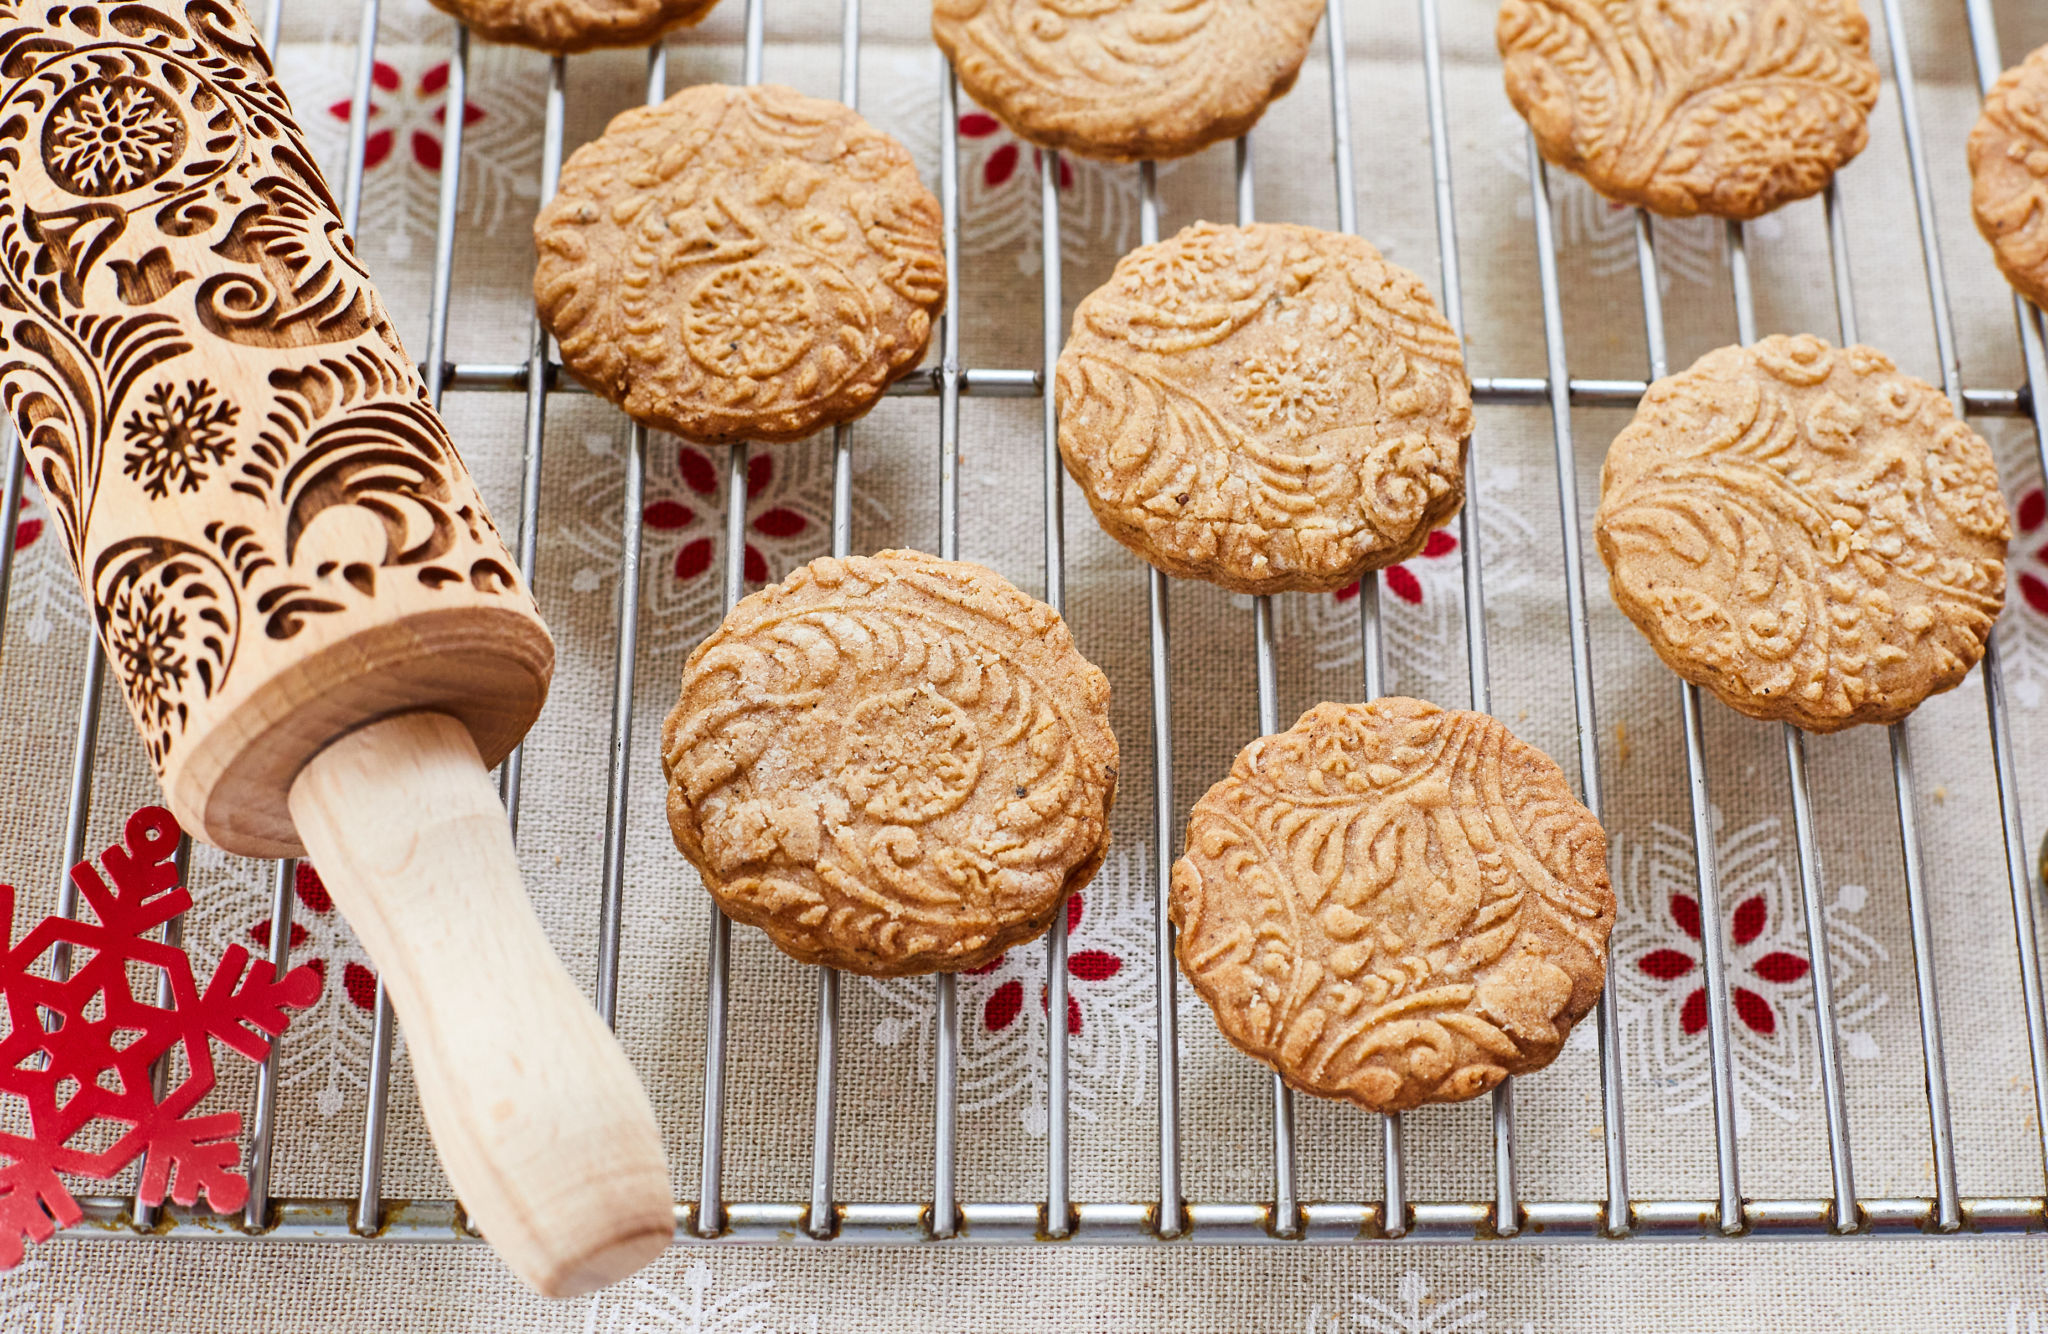 Top 5 Embossed Rolling Pin Cookie Recipes